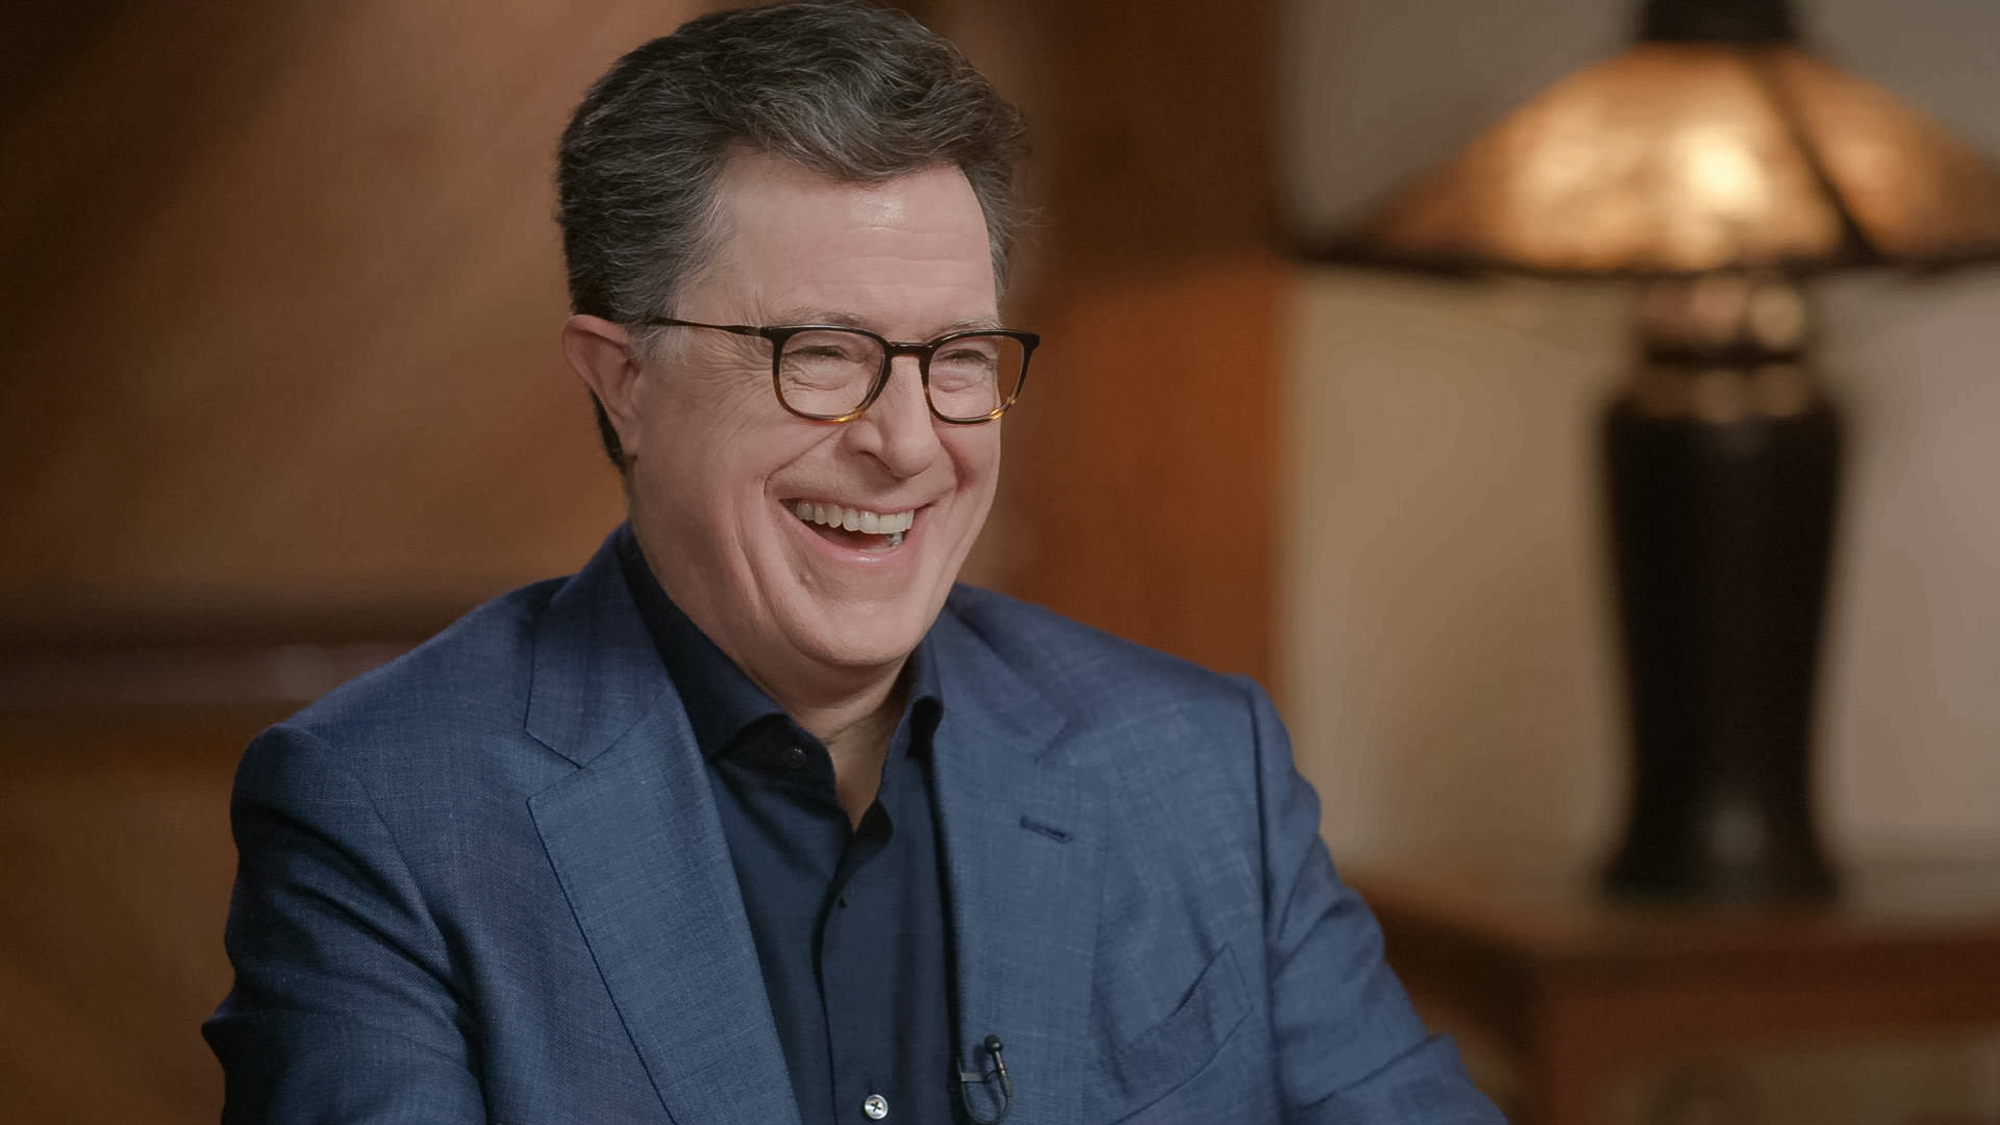 Stephen Colbert at "The Late Show with Stephen Colbert" on March 2, 2023, in New York | Source: Getty Images